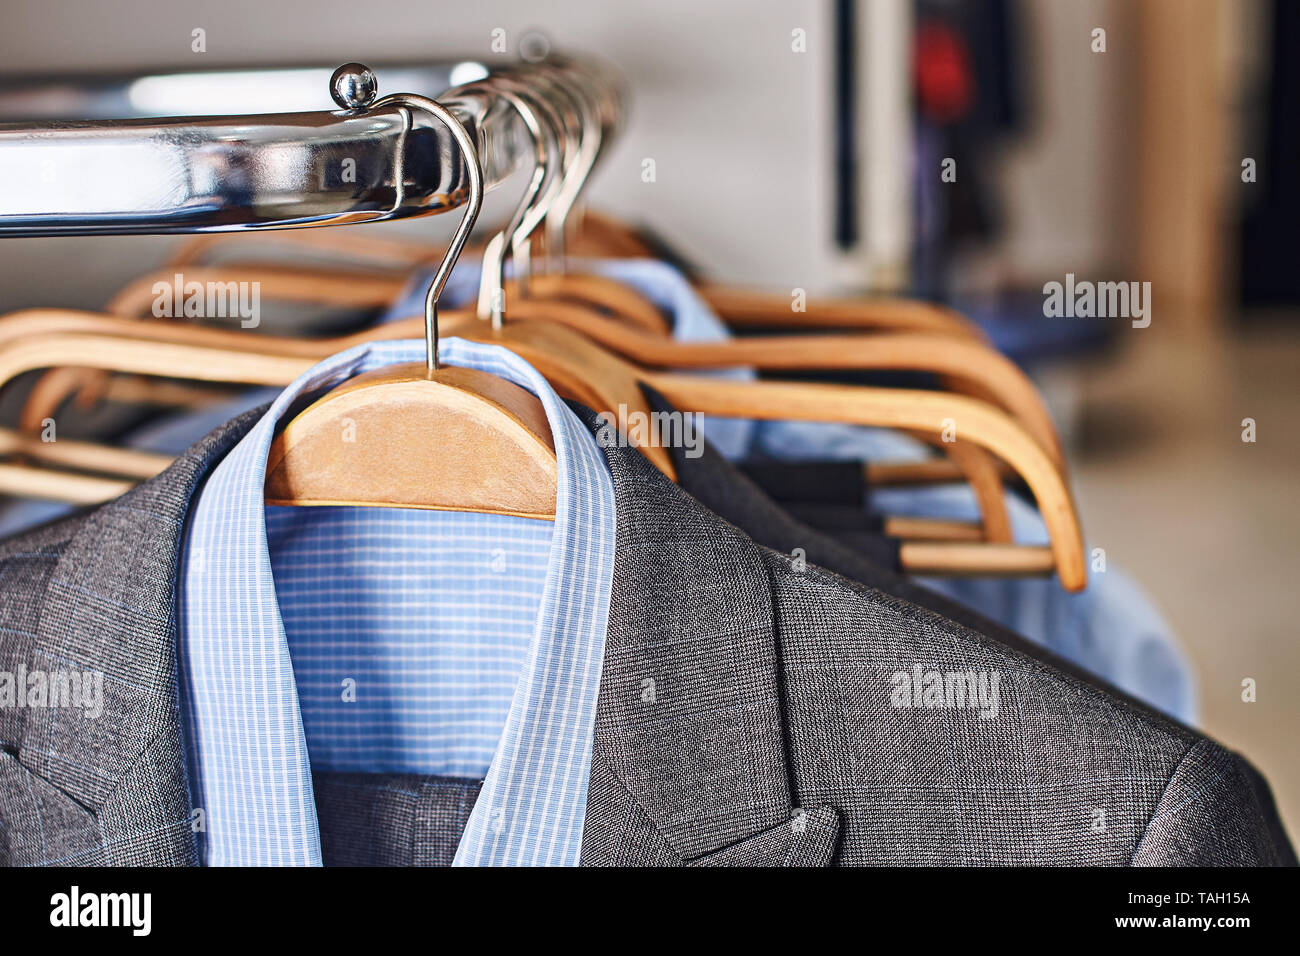 Mens suits and formal shirts on wooden hangers in a clothes store Stock Photo